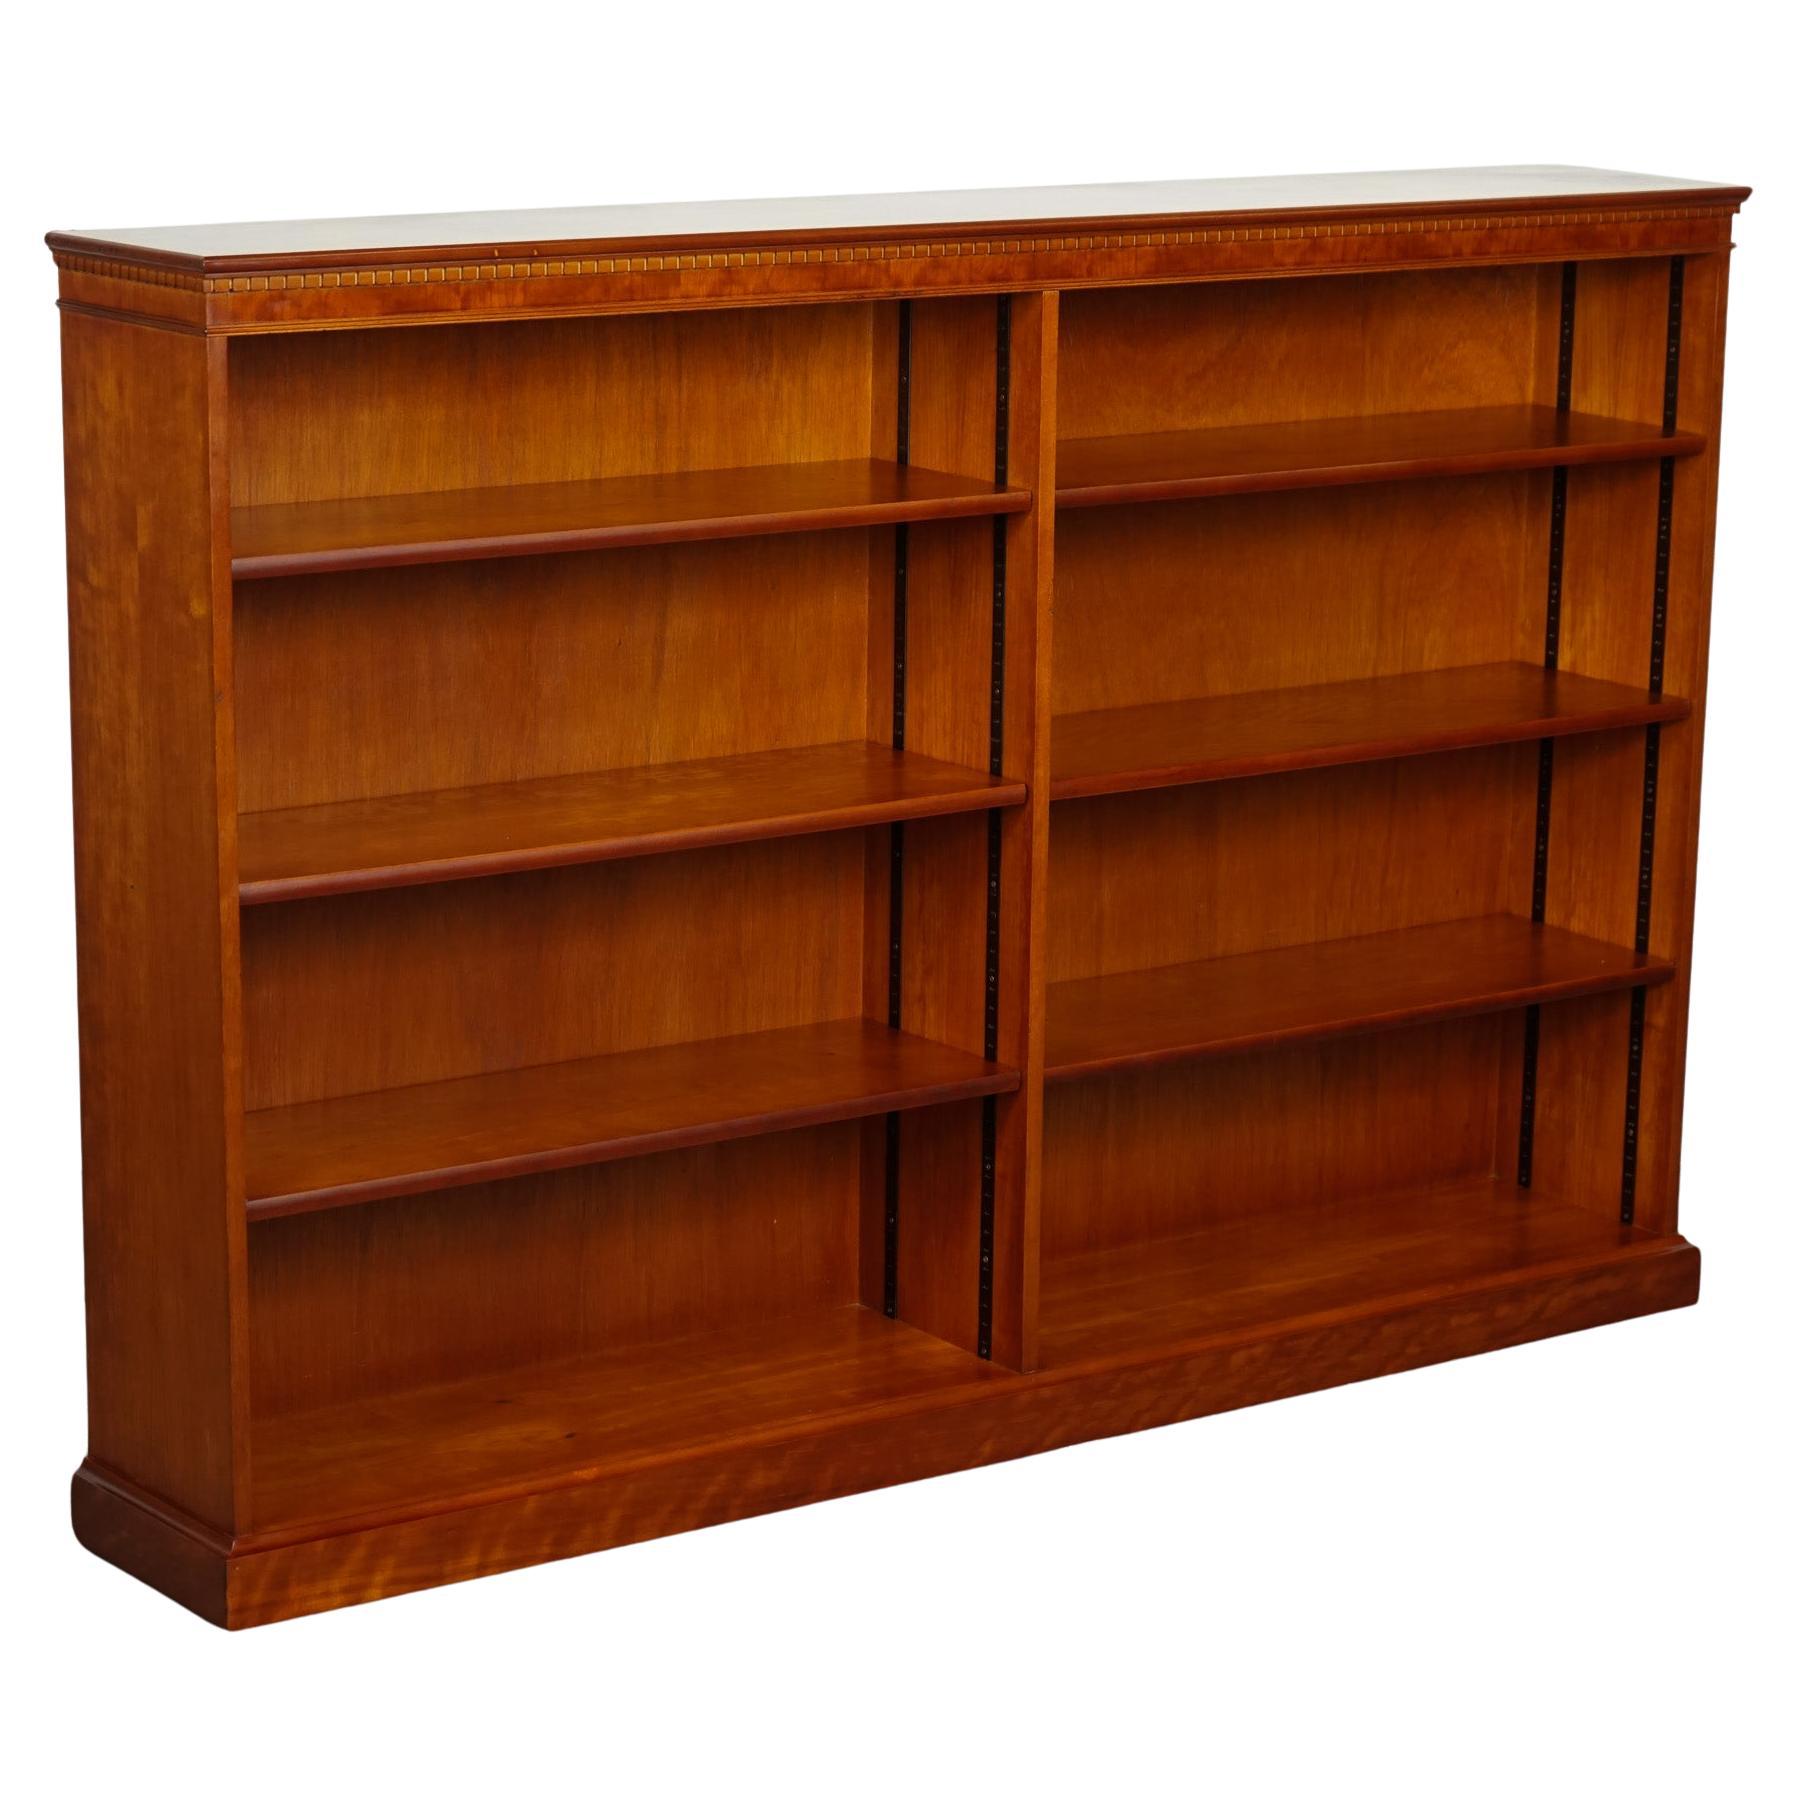 VINTAGE YEW DOUBLE FRONTED LOW OPEN BOOKCASE WiTH ADJUSTABLE SHELVES For Sale